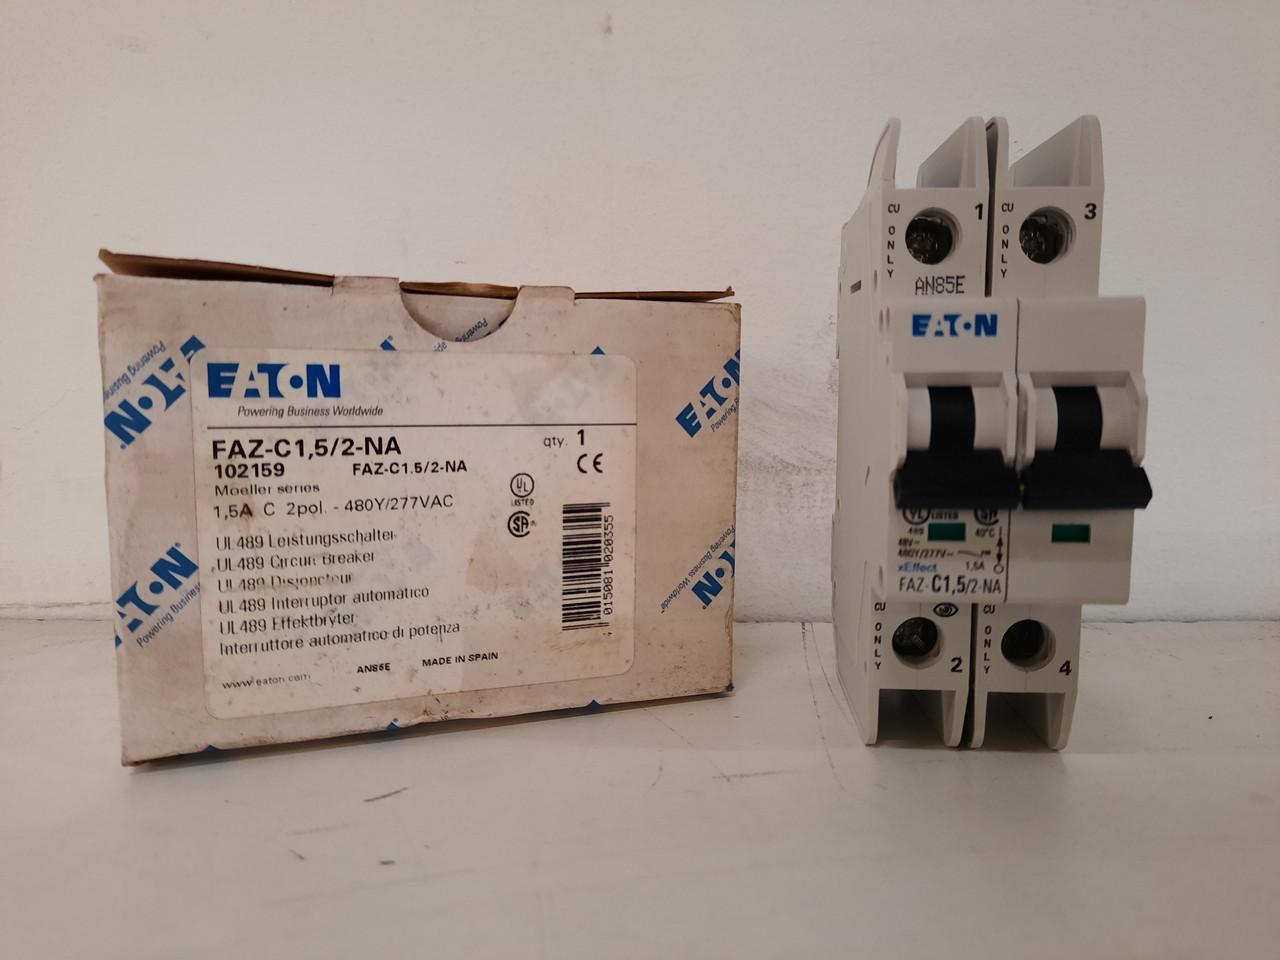 Eaton FAZ-C1.5/2-NA 277/480 VAC 50/60 Hz, 1.5 A, 2-Pole, 10/14 kA, 5 to 10 x Rated Current, Screw Terminal, DIN Rail Mount, Standard Packaging, C-Curve, Current Limiting, Thermal Magnetic, Miniature Circuit Breaker